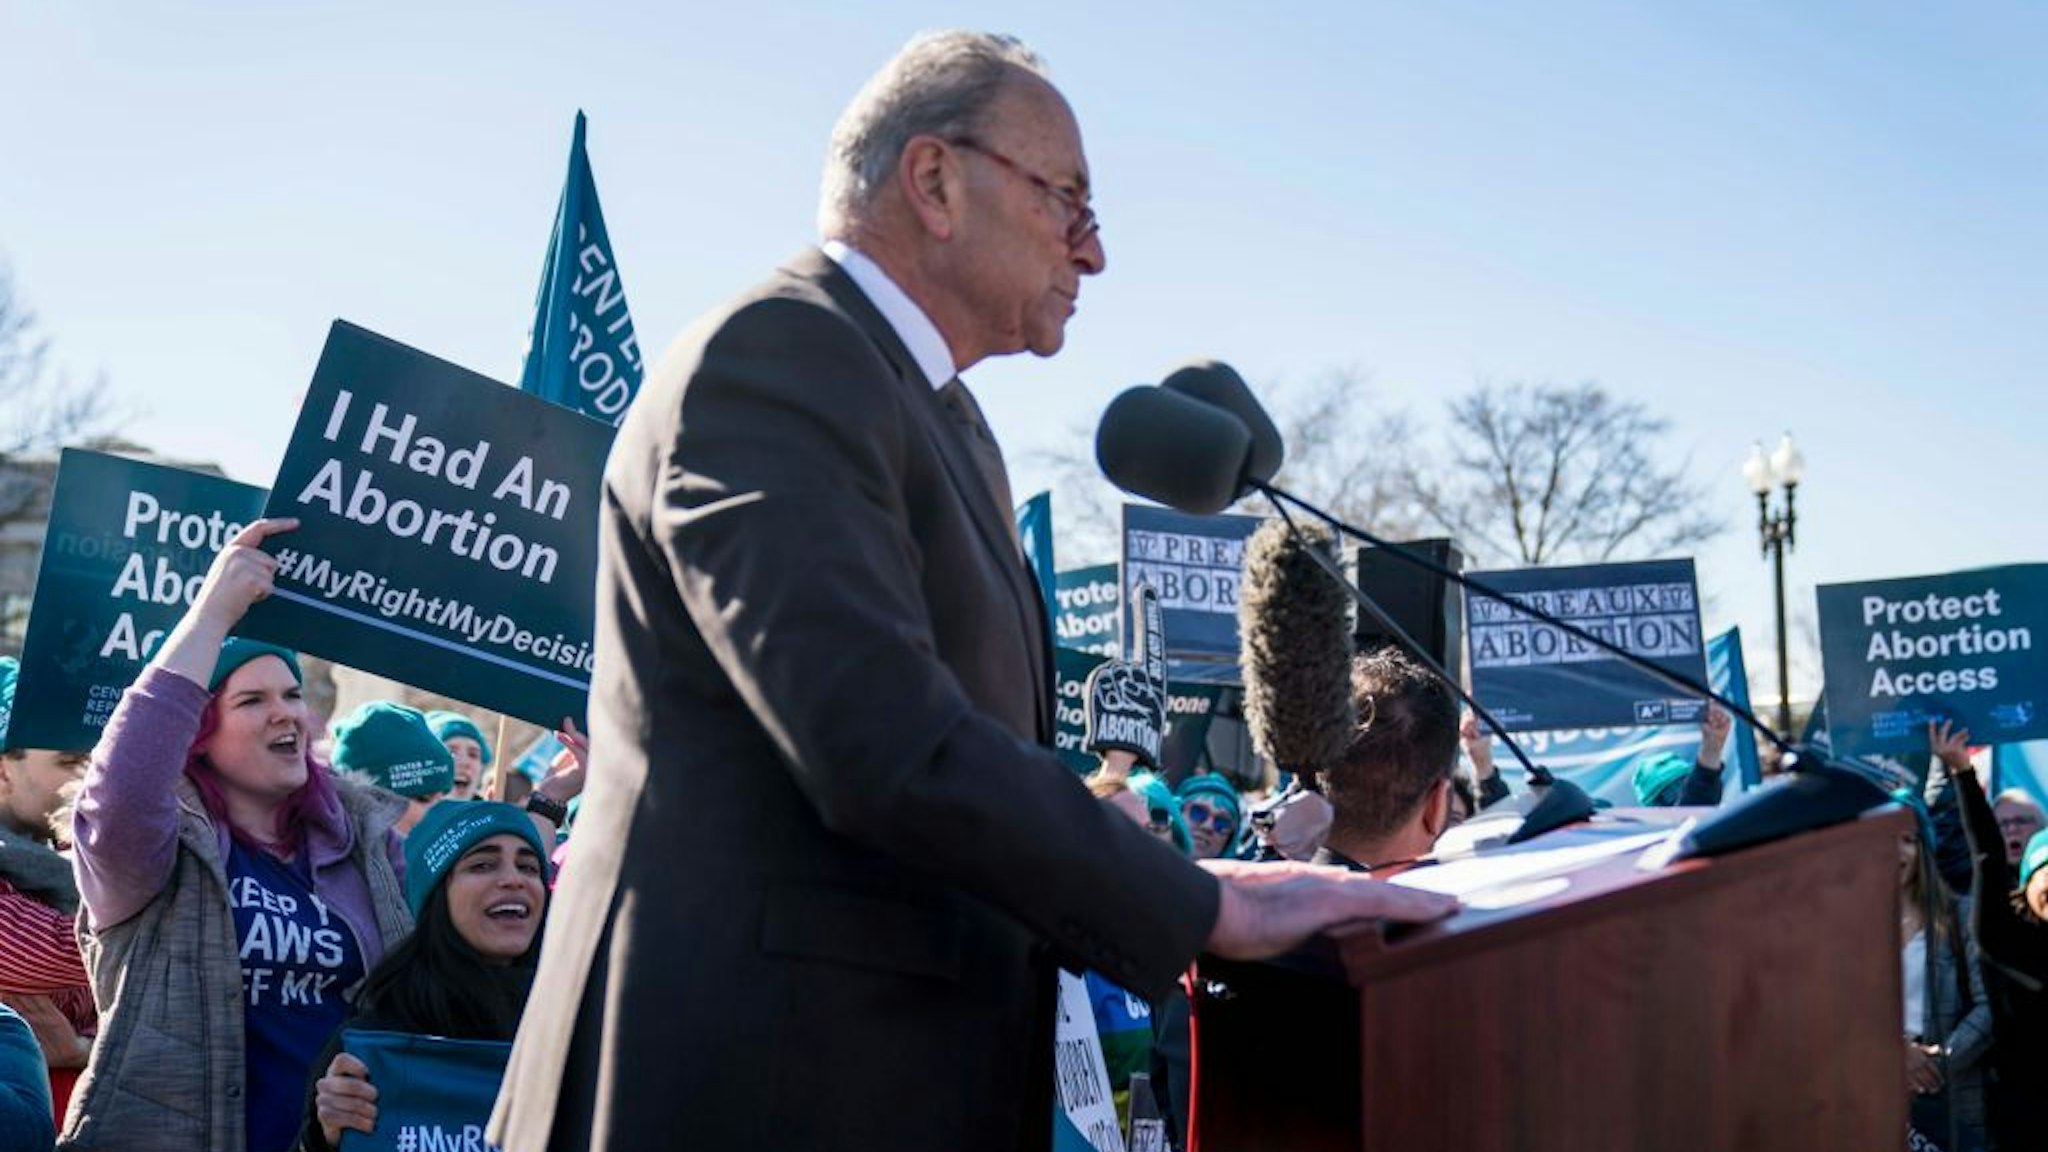 Senate Minority Leader Sen. Chuck Schumer (D-NY) speaks in an abortion rights rally outside of the Supreme Court as the justices hear oral arguments in the June Medical Services v. Russo case on March 4, 2020 in Washington, DC. The Louisiana abortion case is the first major abortion case to make it to the Supreme Court since Donald Trump became President. (Photo by Sarah Silbiger/Getty Images)